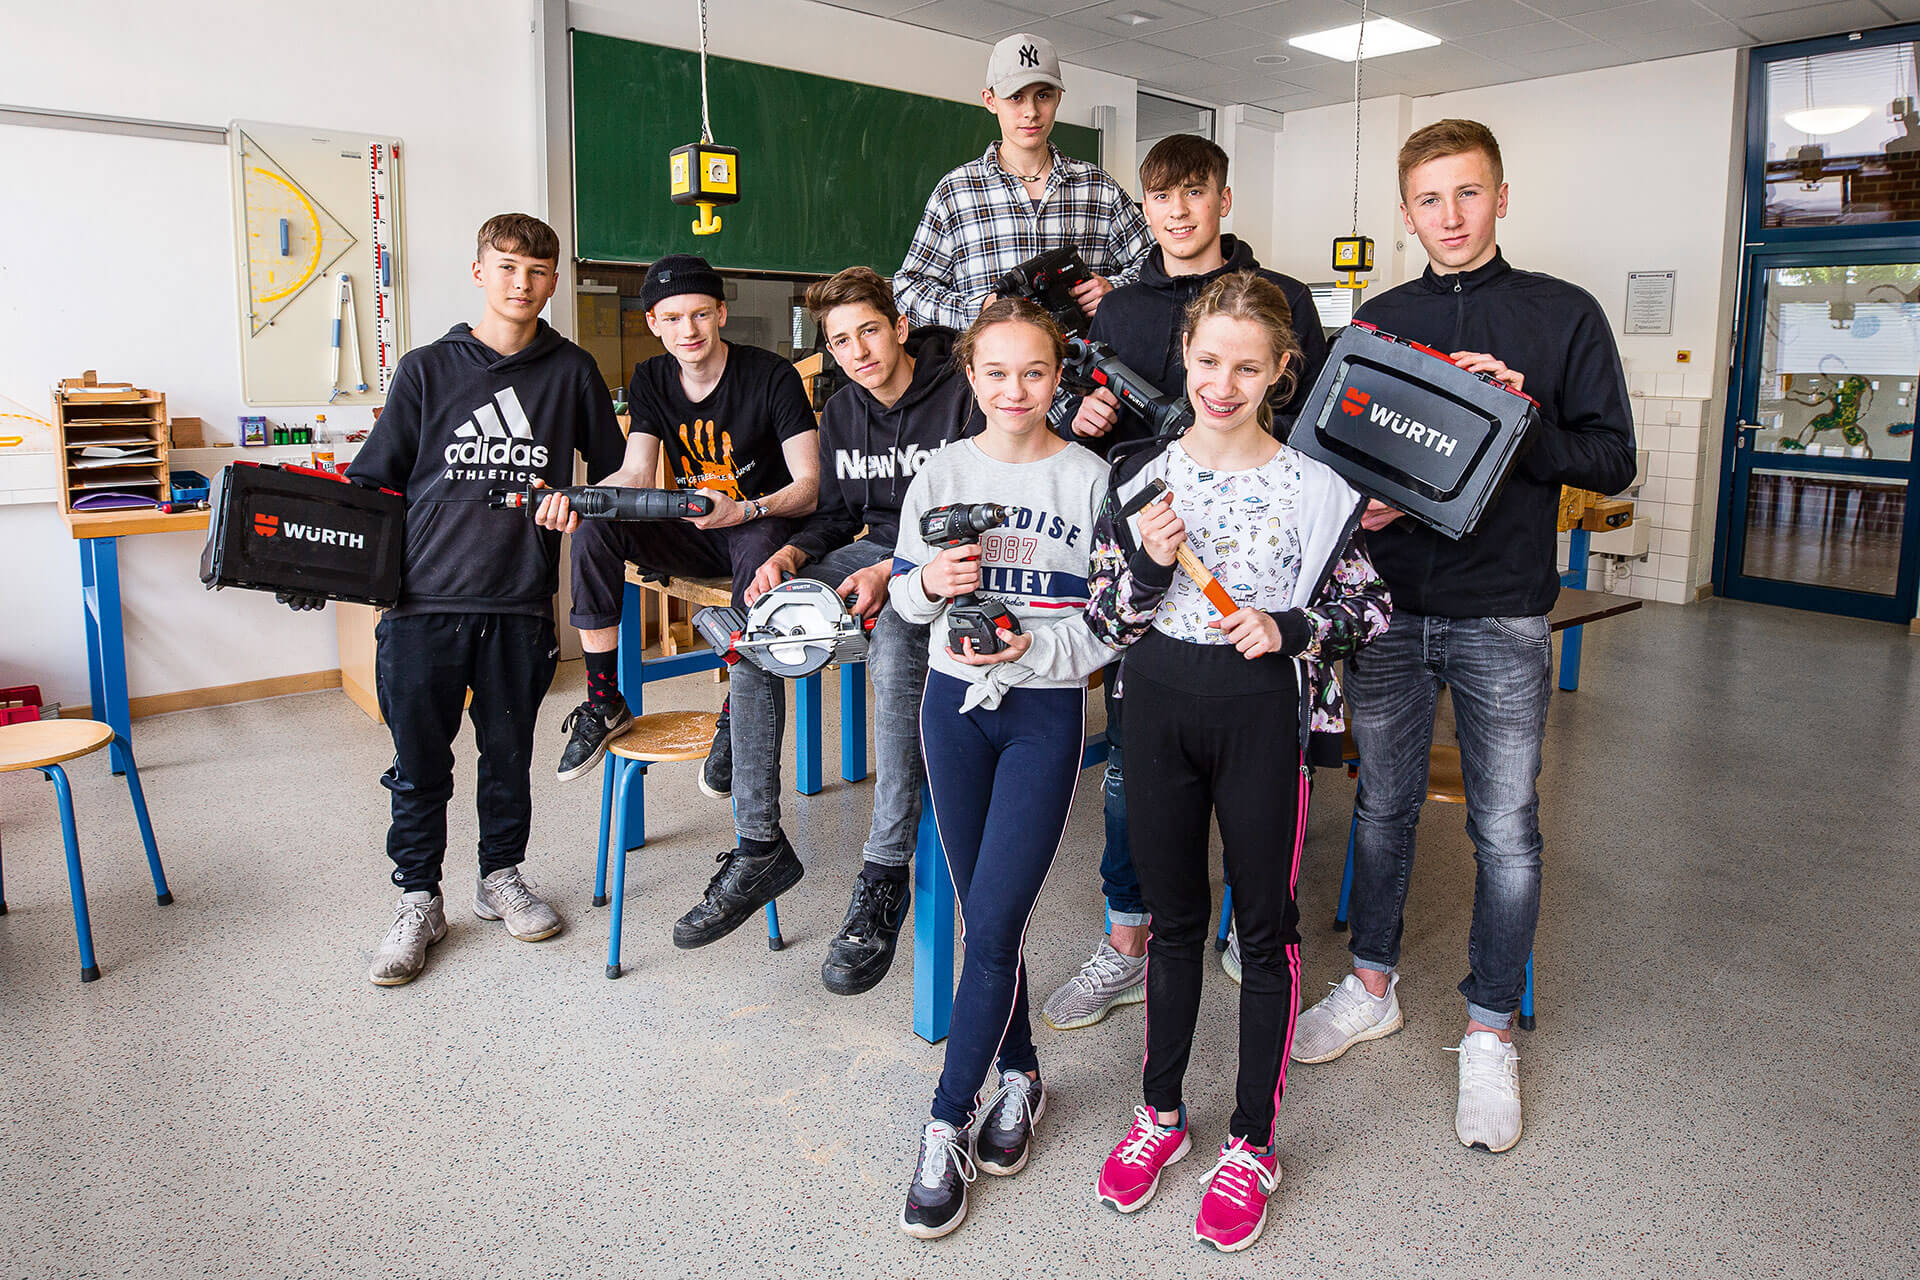 The Würth-sponsored initiative “MACH WAS! (DO SOMETHING!) The trades competition for school teams,” which provides career guidance to seventh to tenth graders, is now firmly established thanks to the very positive response to the program. In the third round, which will start in the 2021/22 school year, 250 schools from all across Germany will be able to participate. The aim of the initiative is to get young people interested in the trades, to show them options for potential careers while making sure they have fun in the process and, in doing so, to counteract the shortage of skilled workers.